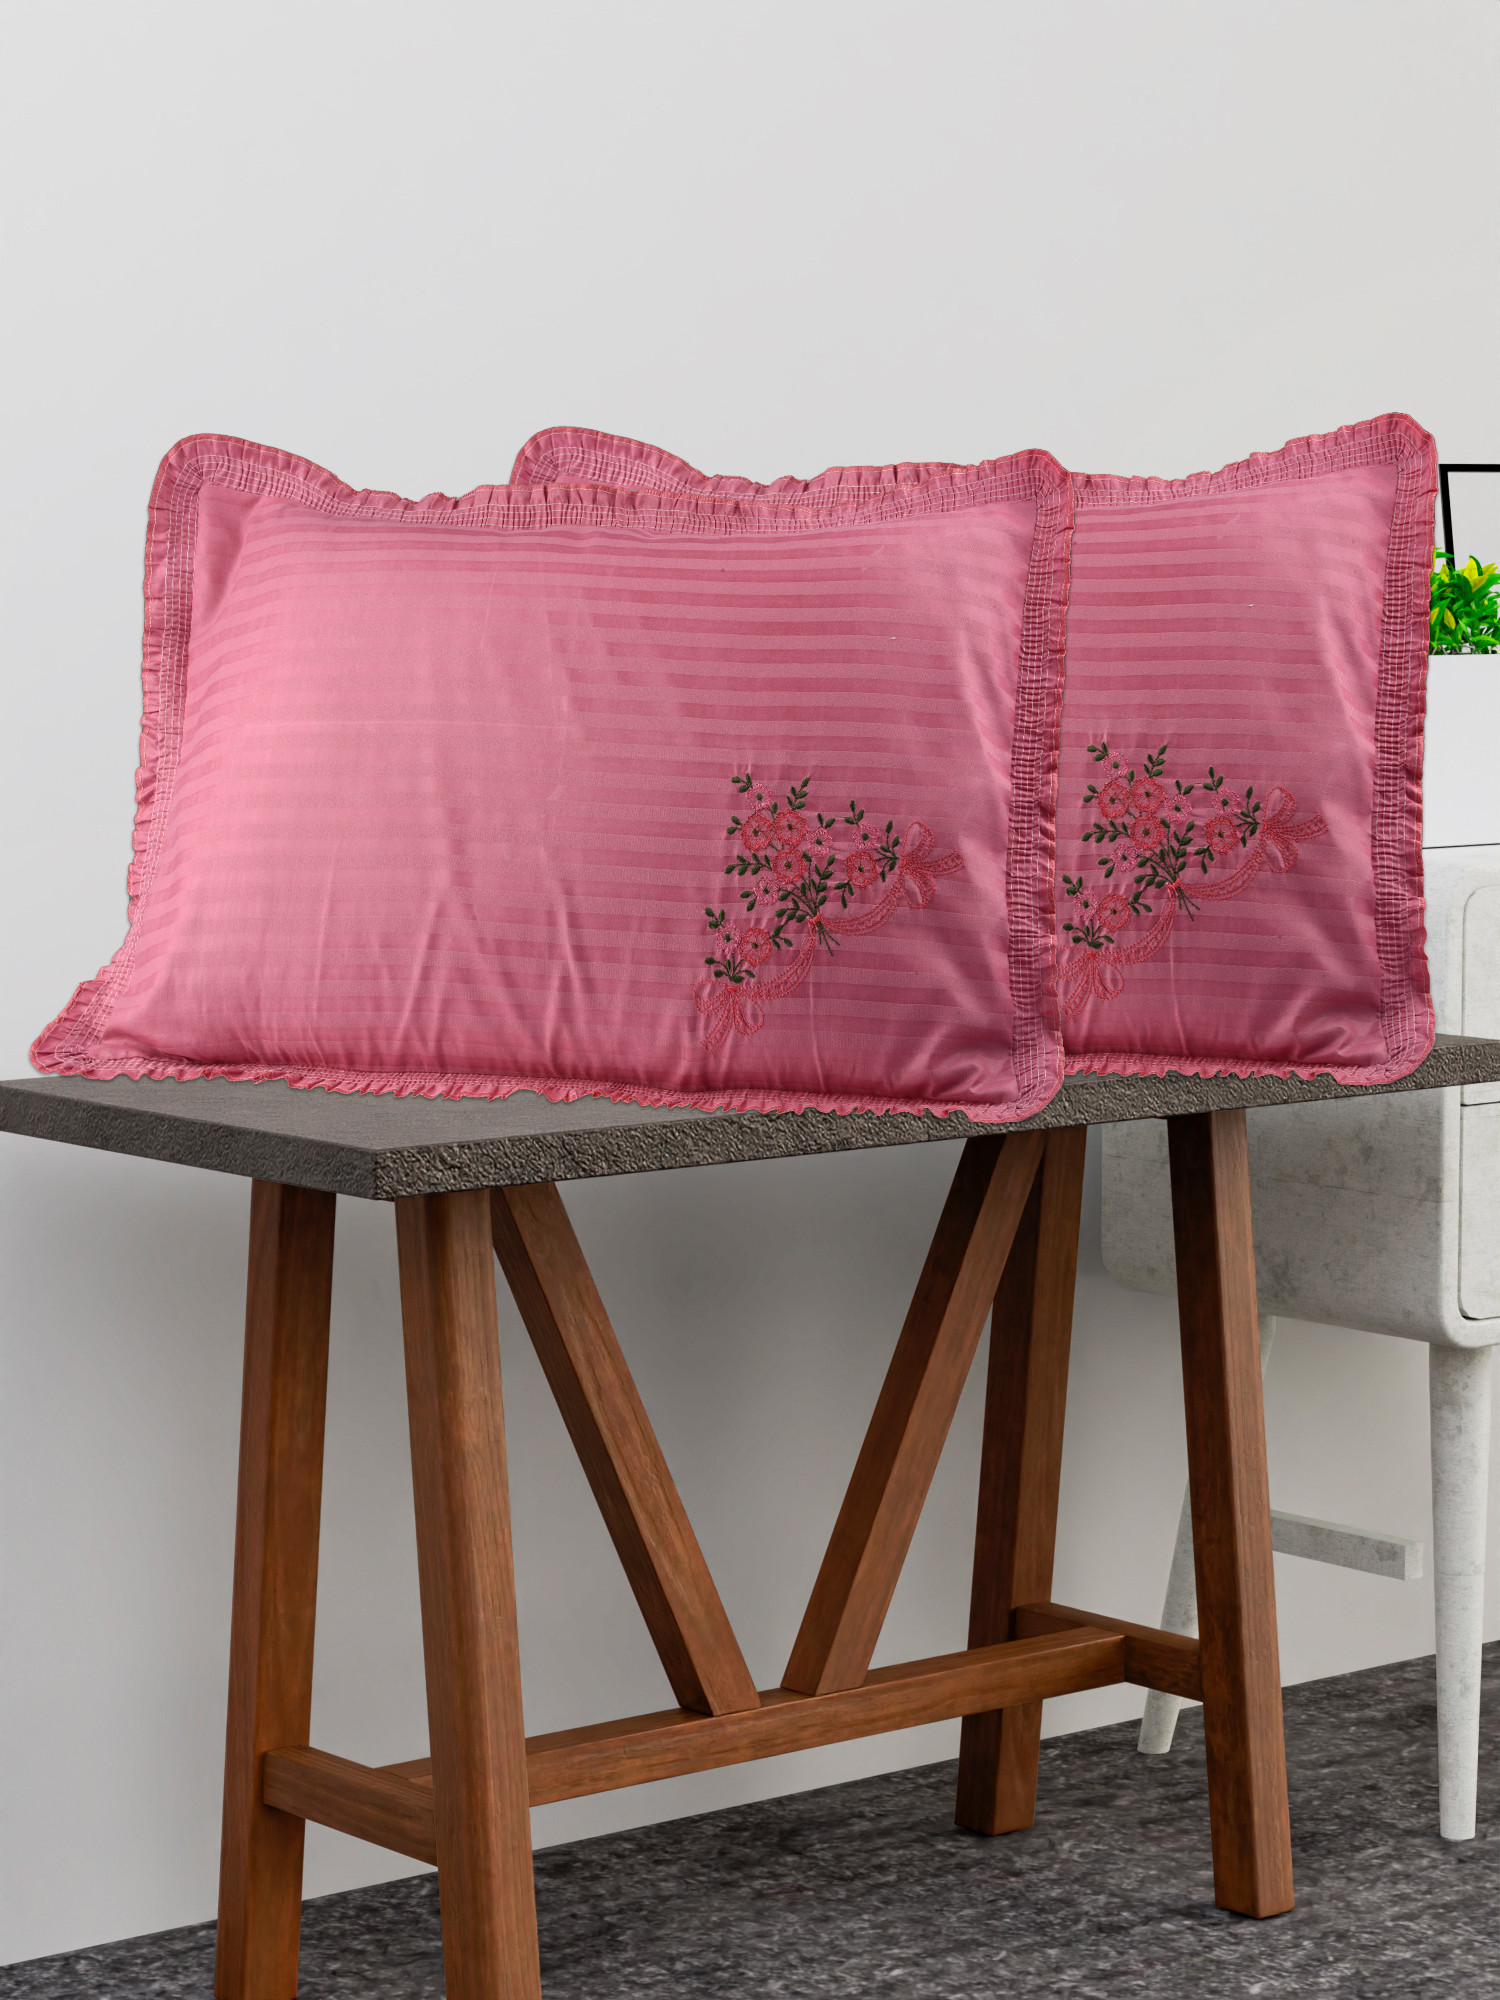 Kuber Industries Pillow Cover | Cotton Pillow Cover Set | Cushion Pillow Cover Set | Pillow Cover Set for Bedroom | Lining Embroidery Pillow Cover Set |Dark Pink